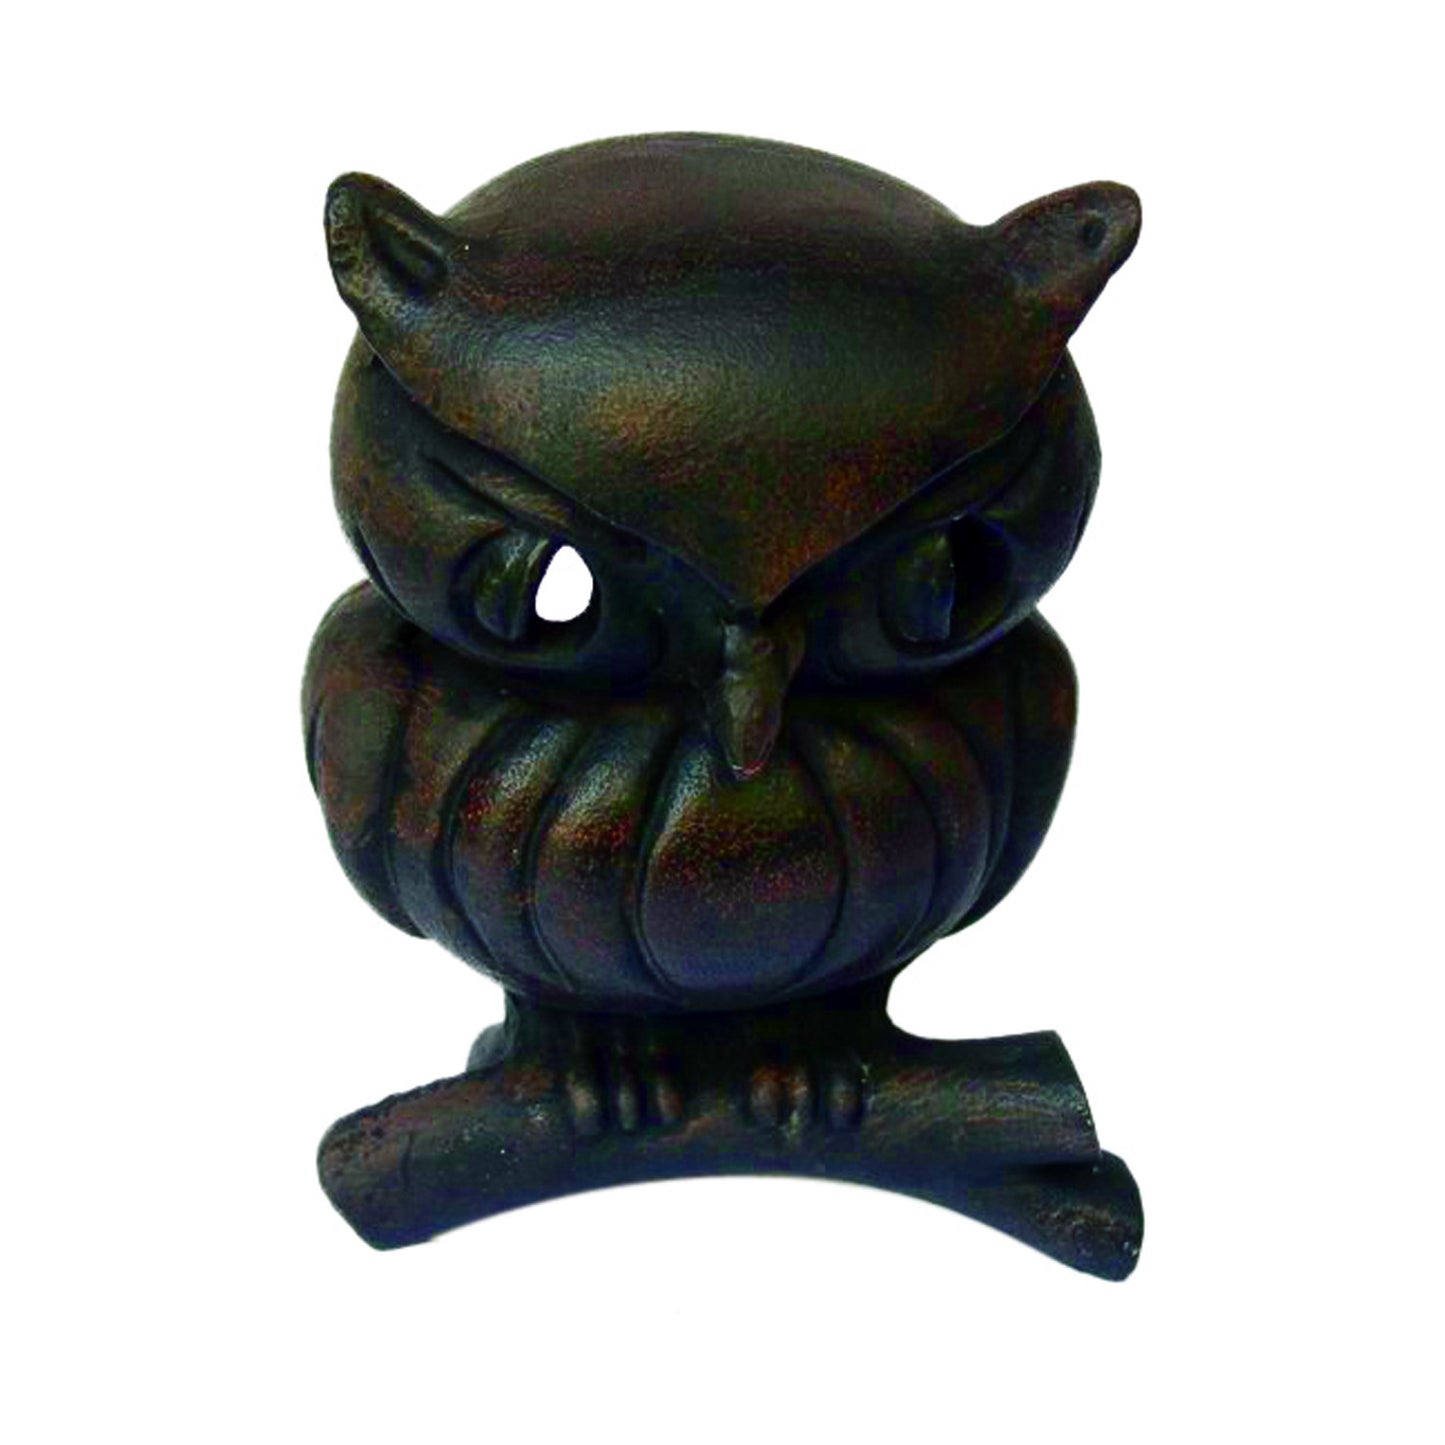 GiftBay GS-503 Halloween Metal Owl 7 inch height, with Votive Holder in Back, Rustic Finish